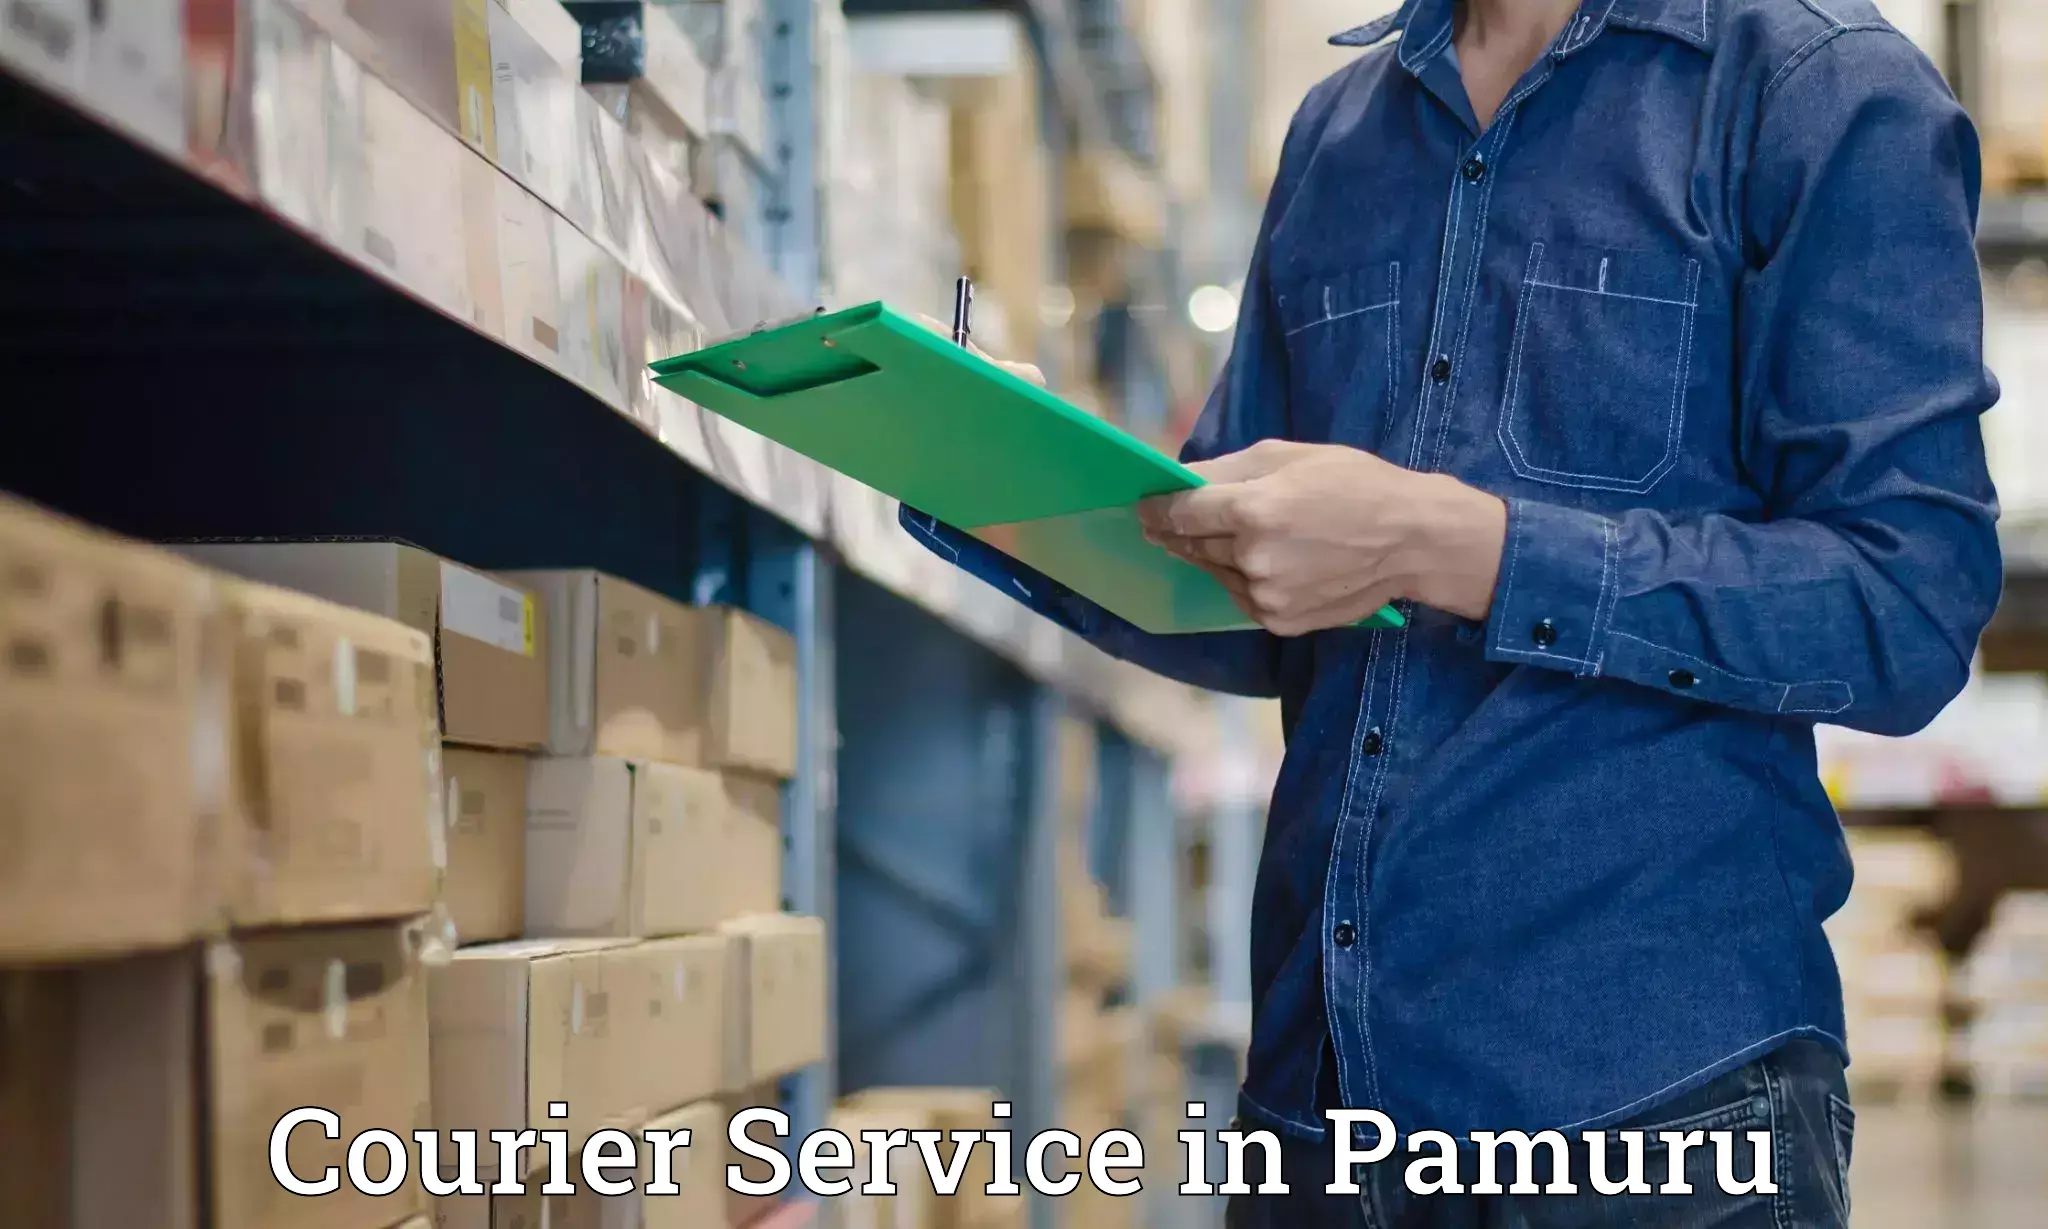 Corporate courier solutions in Pamuru